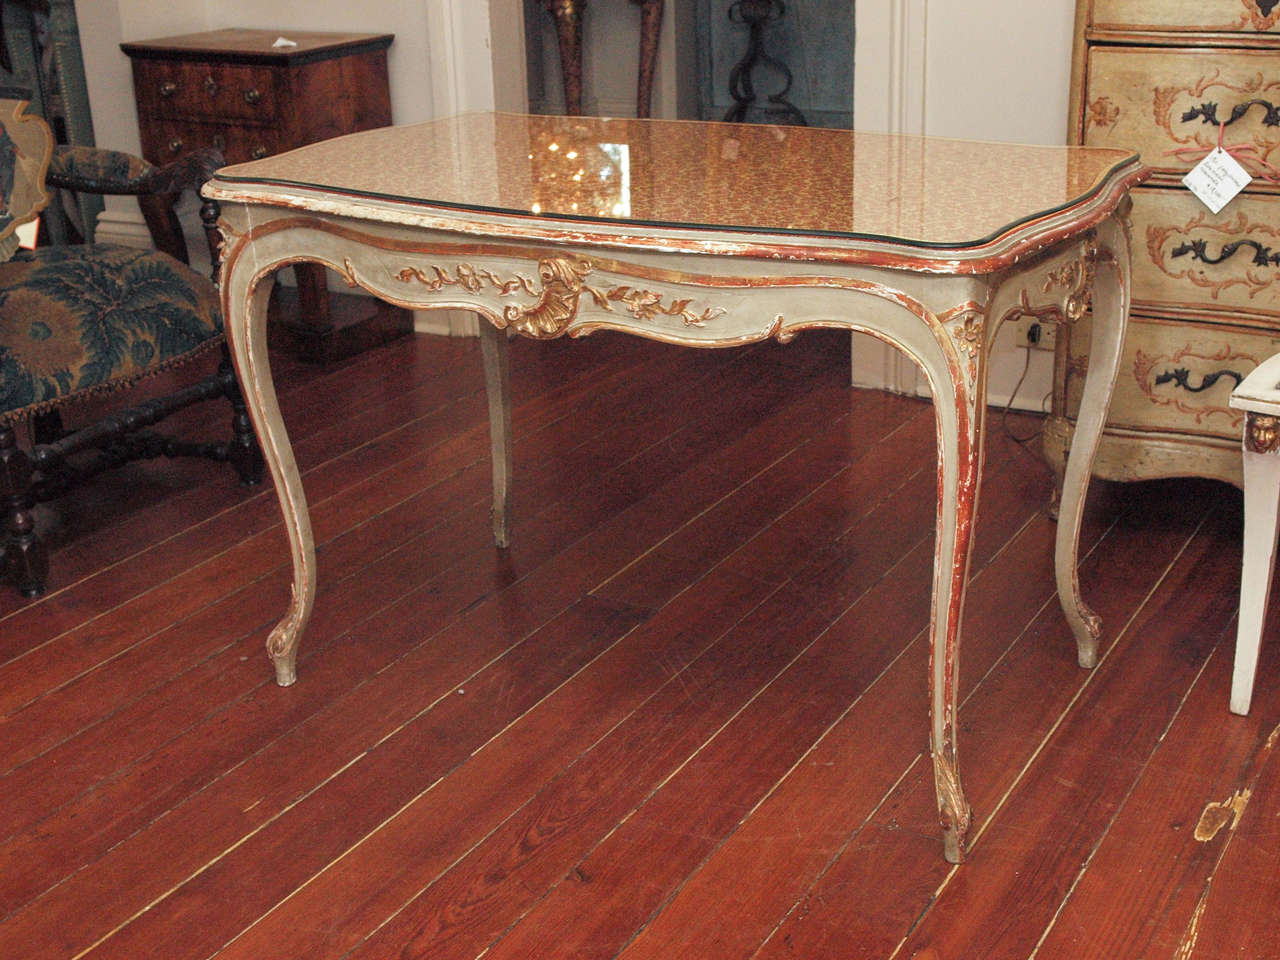 A table or bureau plat in the Louis XV taste, with tall cabriole legs and a drawer, the table with raised, gilded carving and painted,  and having a conforming glass top over fabric.  We imagine the purchaser of this piece replacing the fabric to